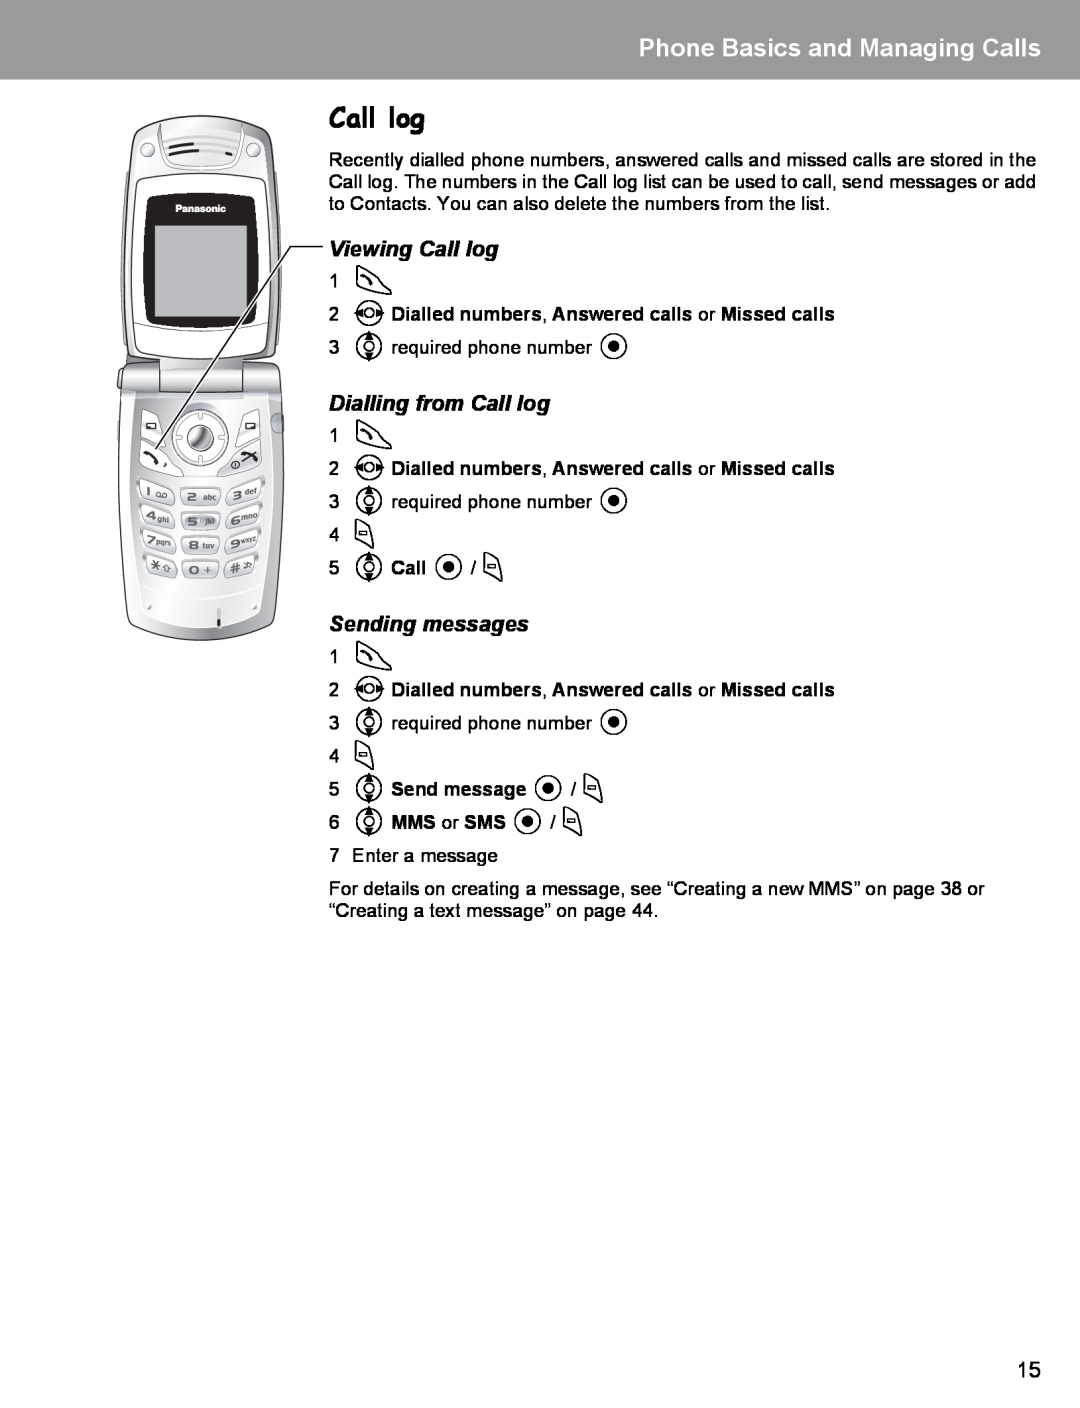 Panasonic EB-X400 Viewing Call log, Dialling from Call log, Sending messages, 5 4Send message / A 